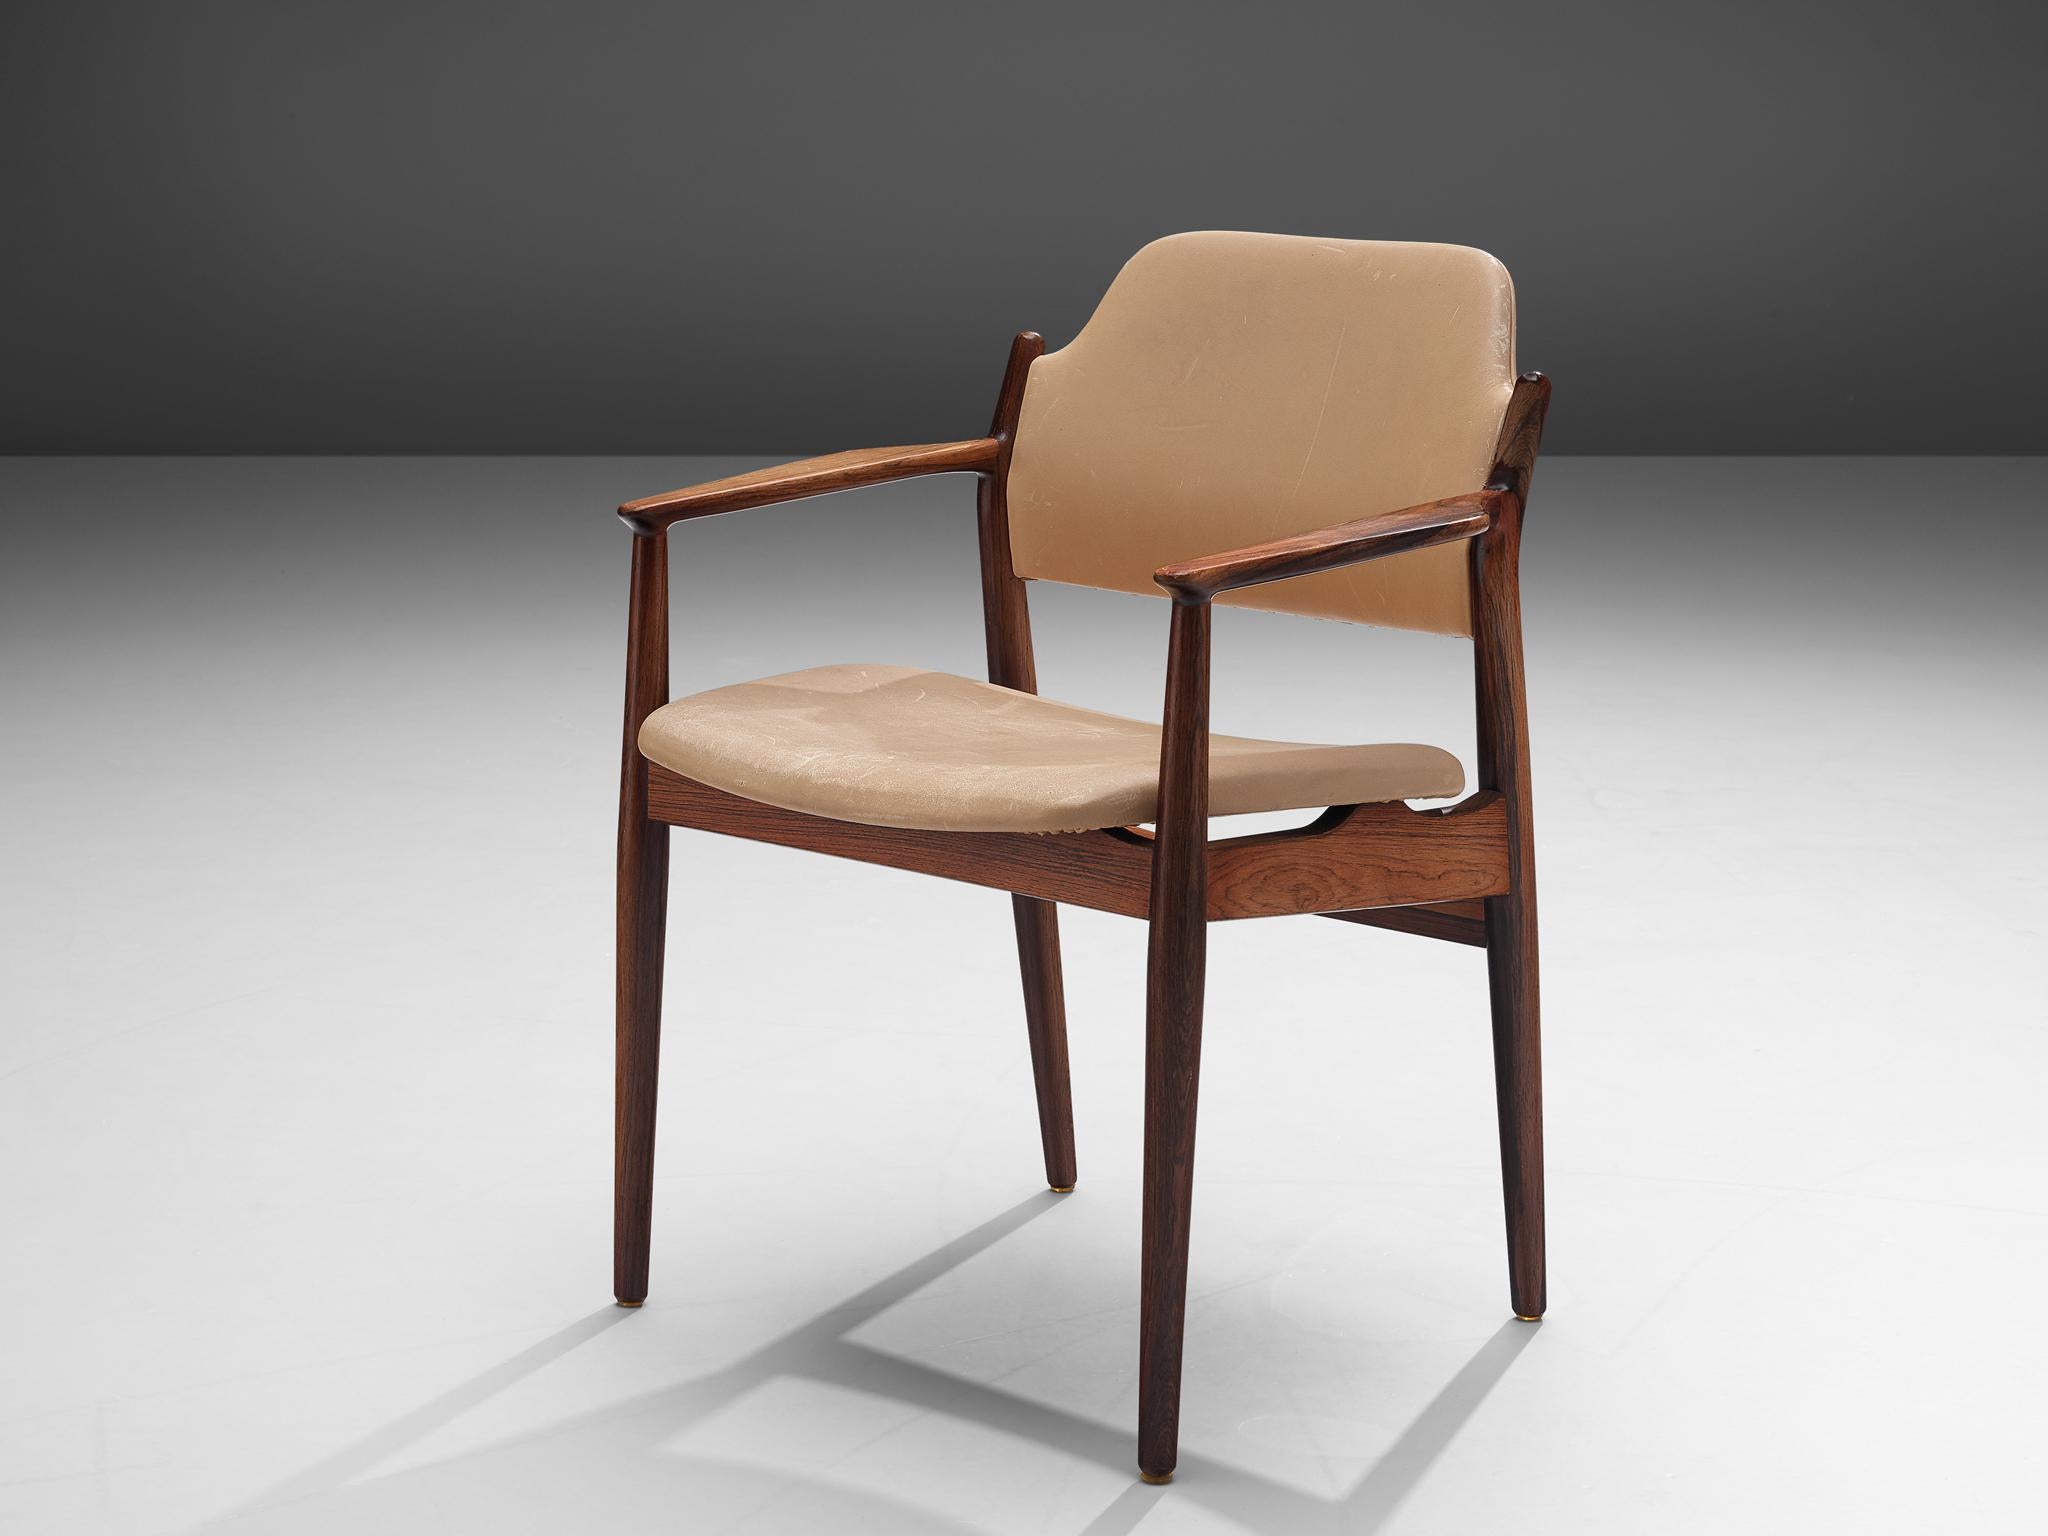 Arne Vodder for Sibast, dining chair model 62A, rosewood and faux leather, Denmark, 1960s.

This Classic armchair is executed in rosewood. The chair is a good example of the great craftsmanship of Arne Vodder. The seating and back show a simple and